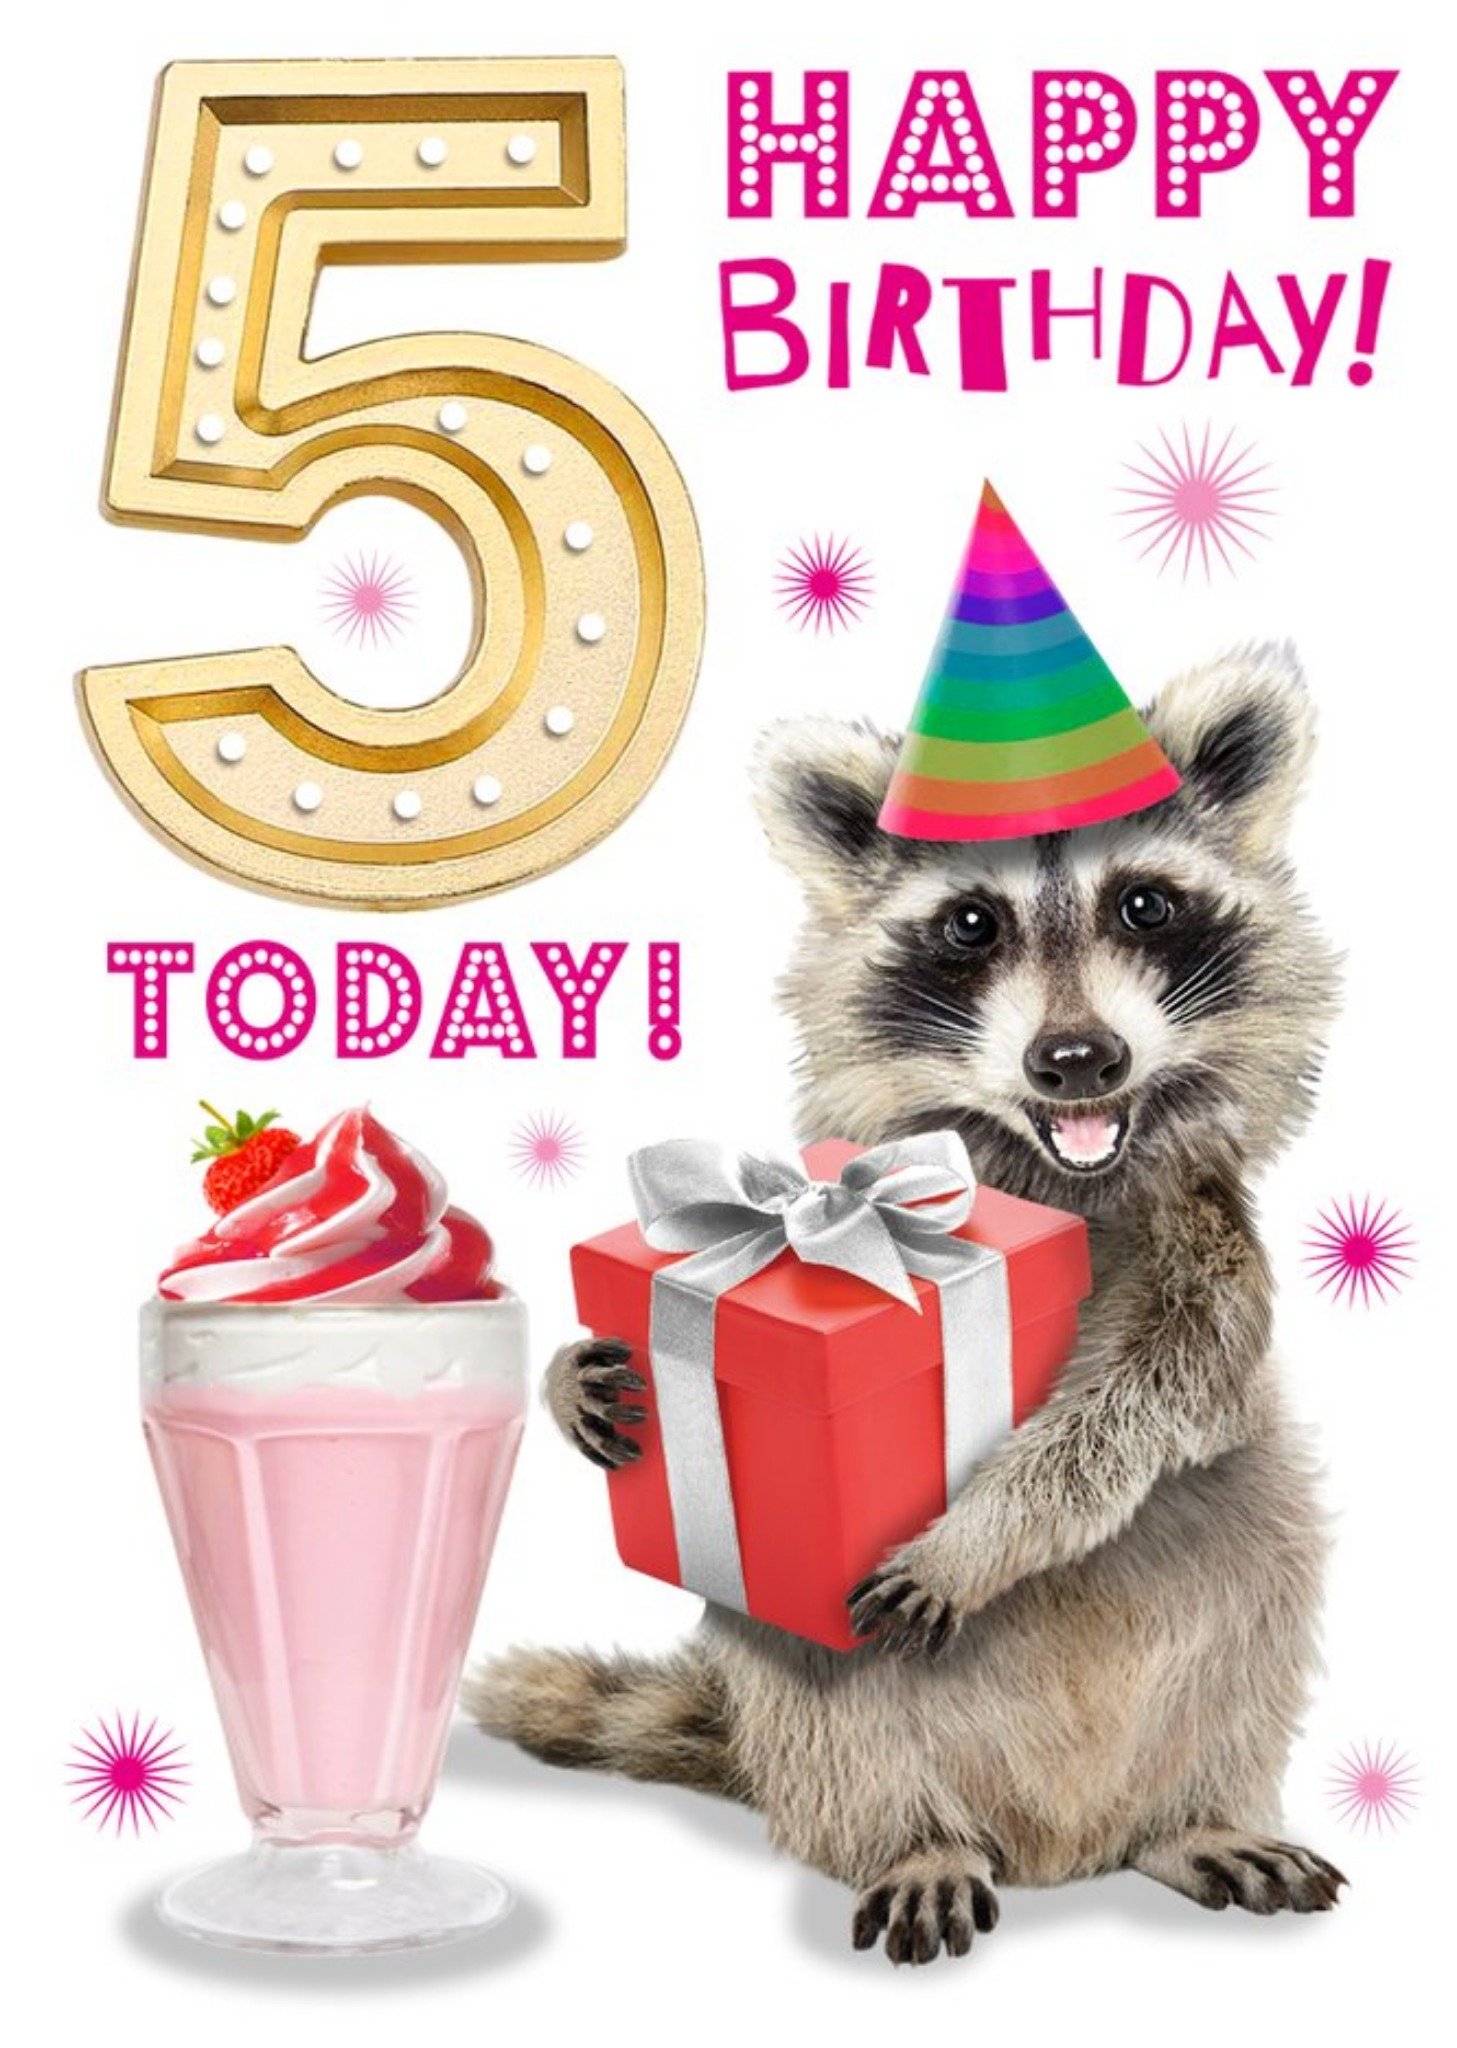 Moonpig Cute Racoon Holding Present 5th Birthday Card, Large